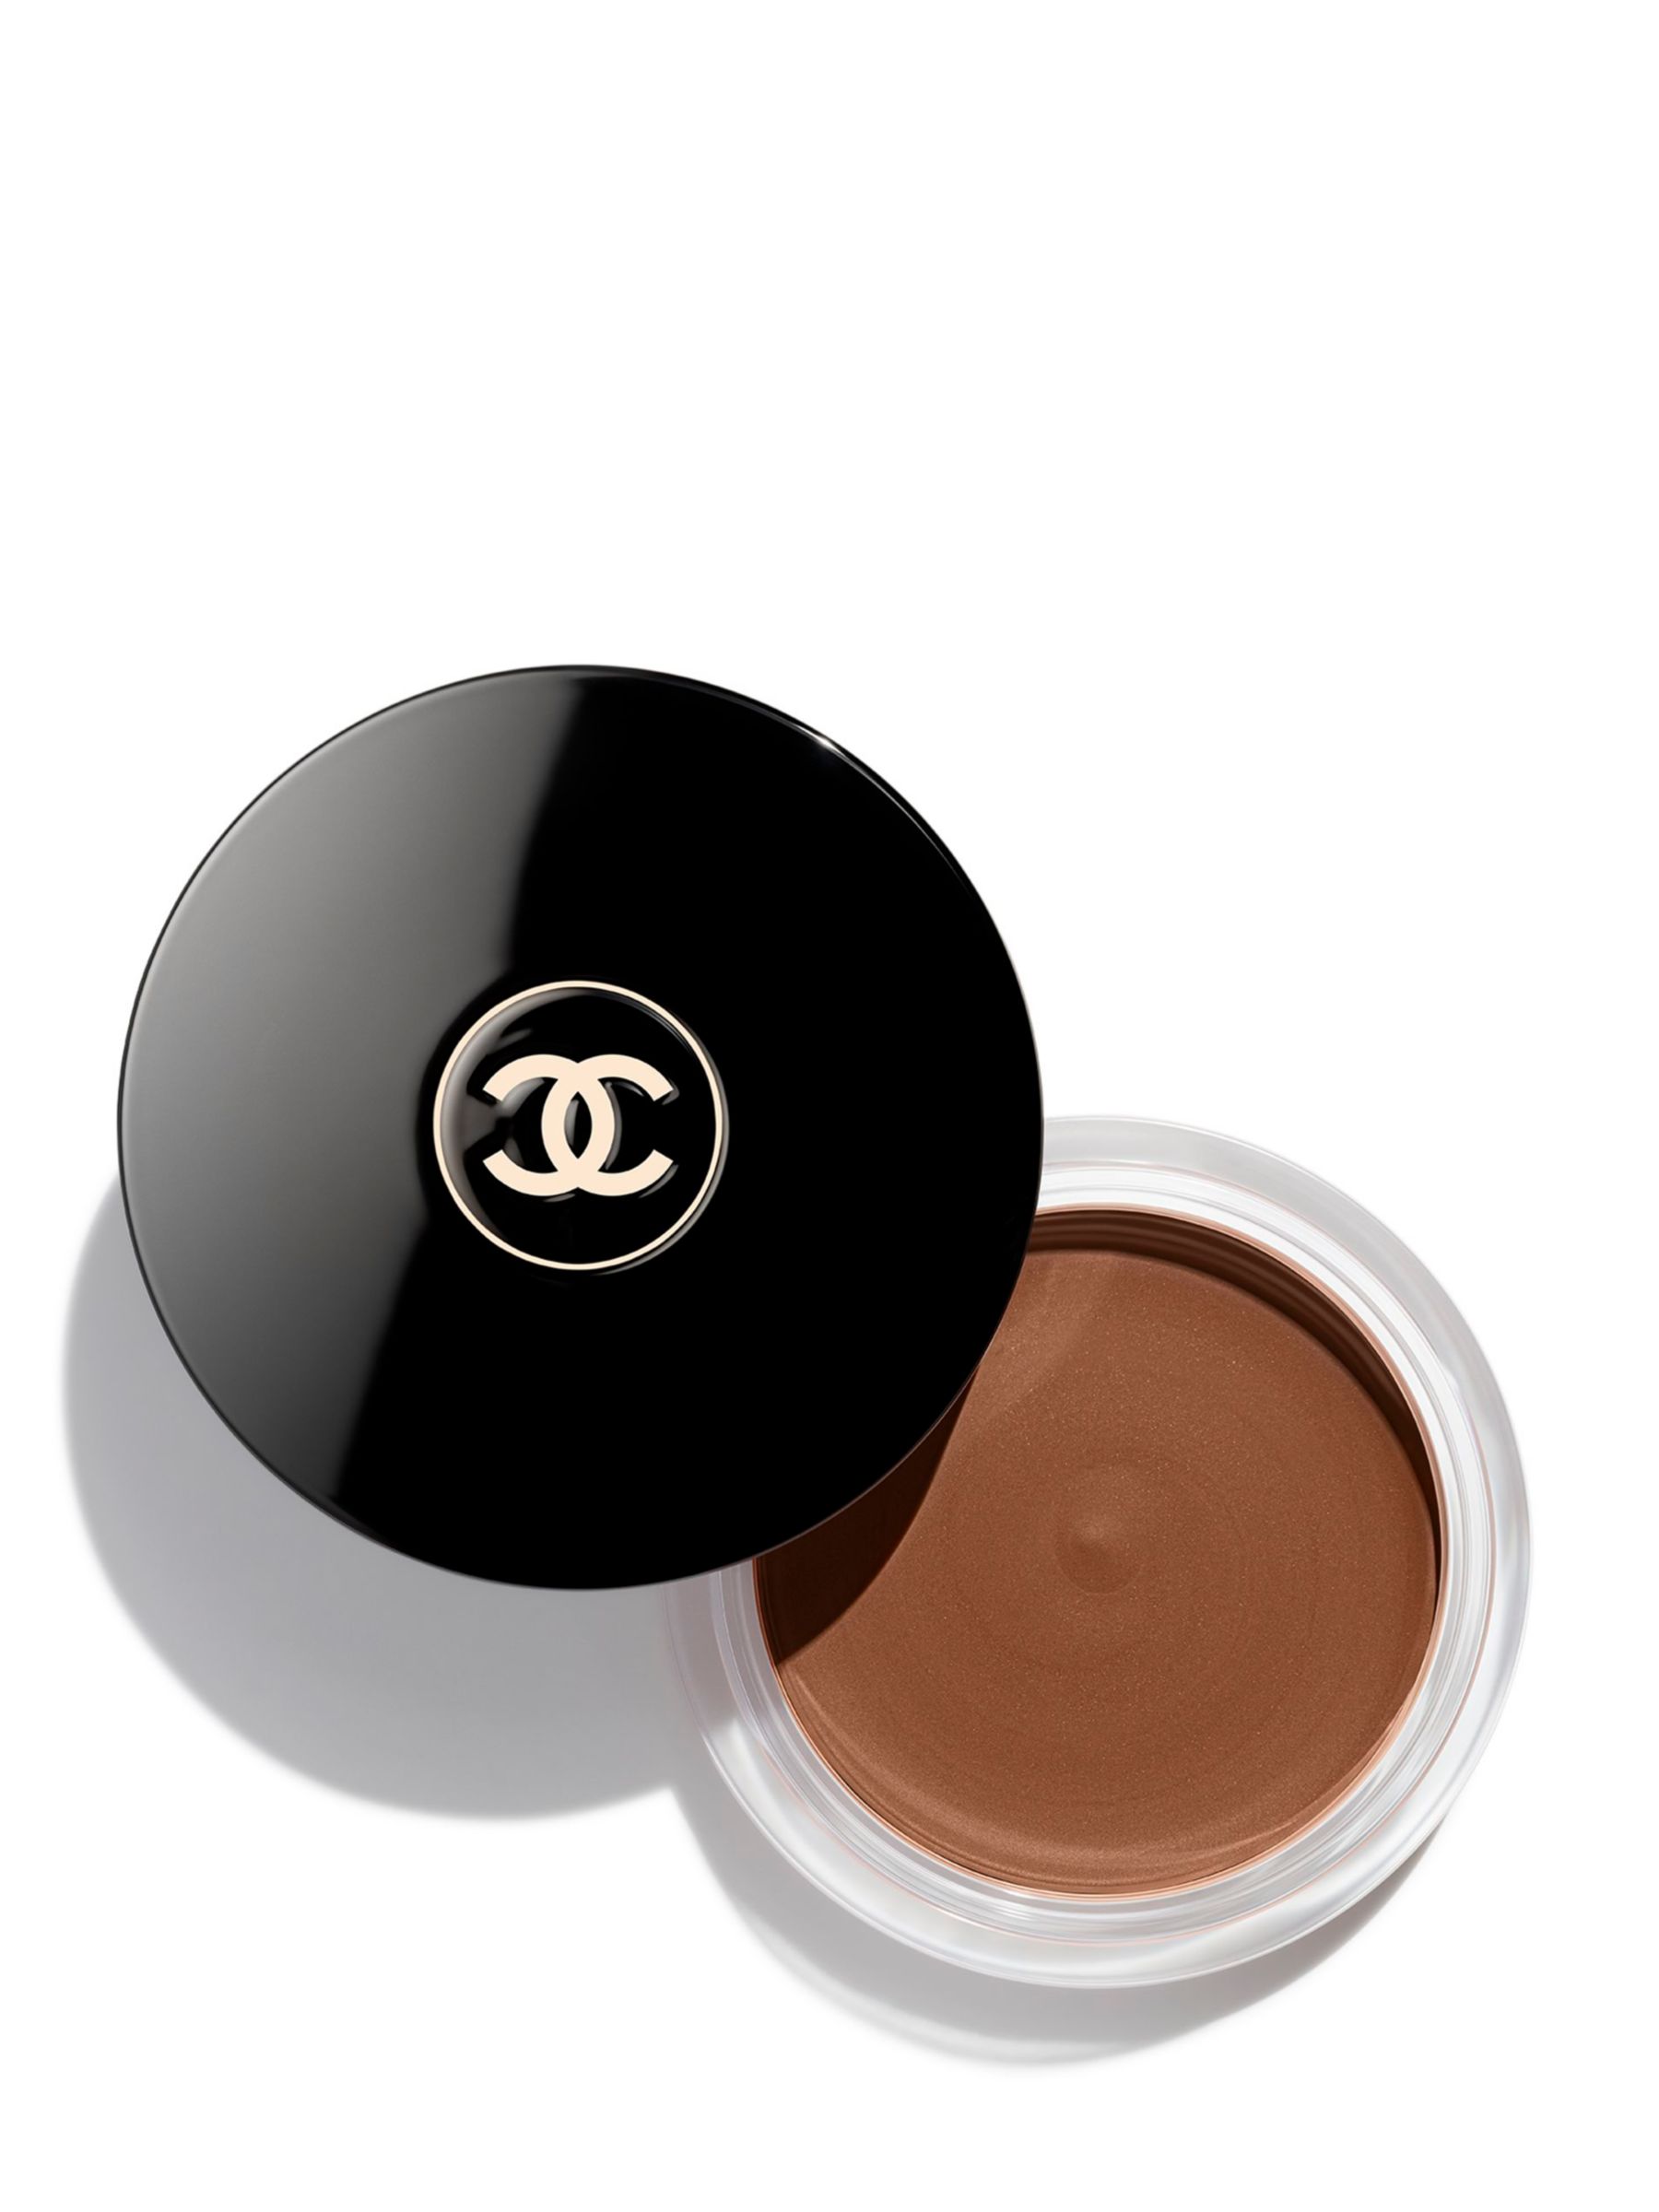 CHANEL Les Beiges Bronzer - Application & Review 🤍, Gallery posted by B E  C 🕊️